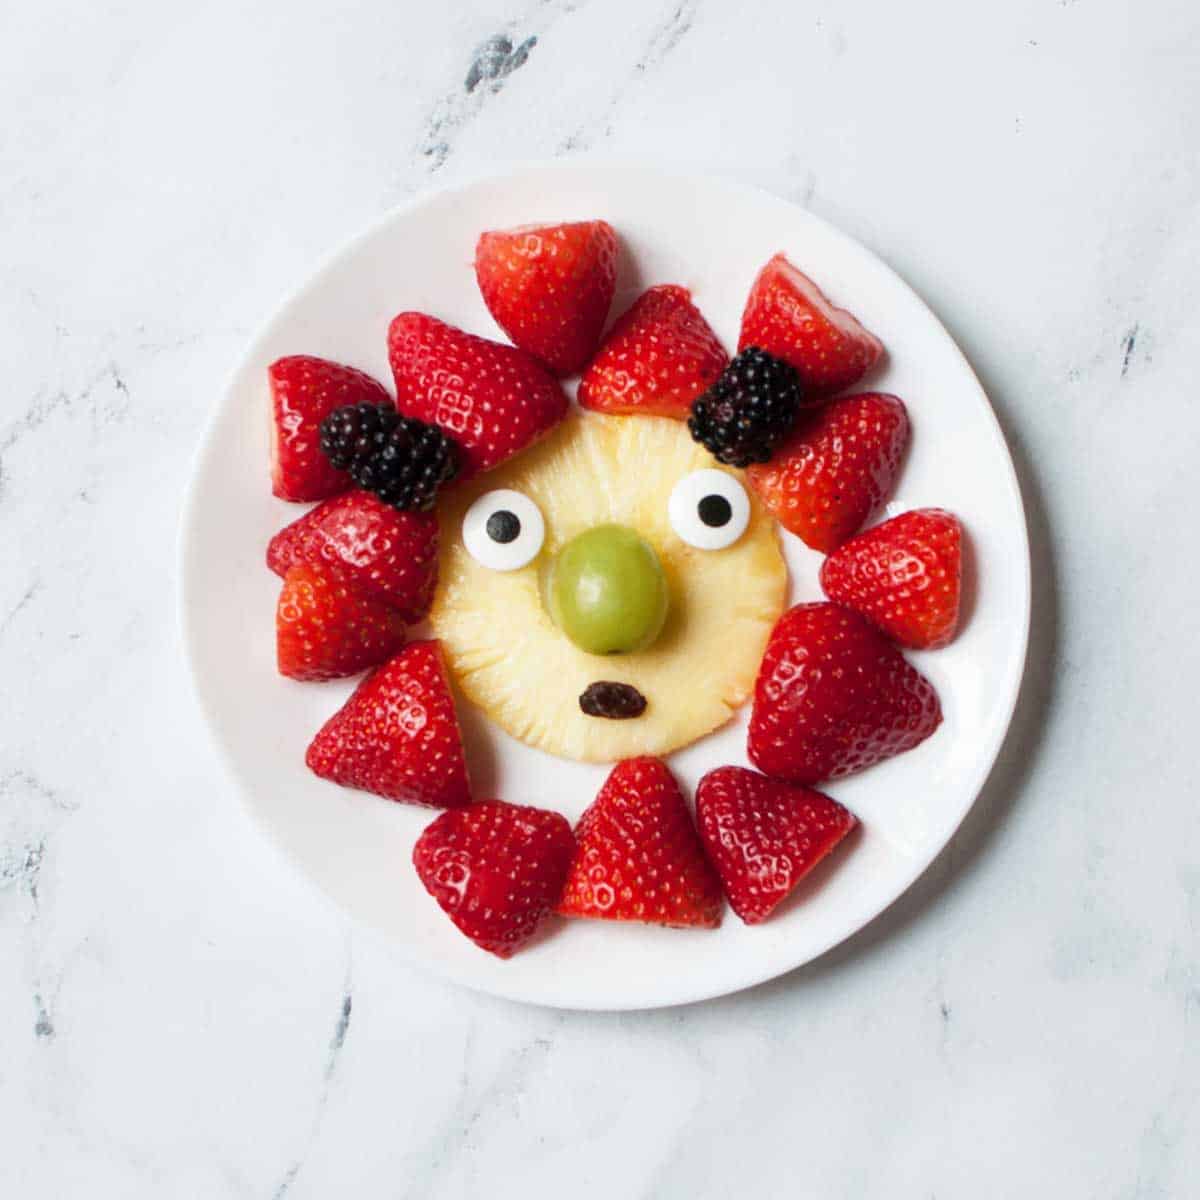 a plate of fruit arranged to look like a monster 